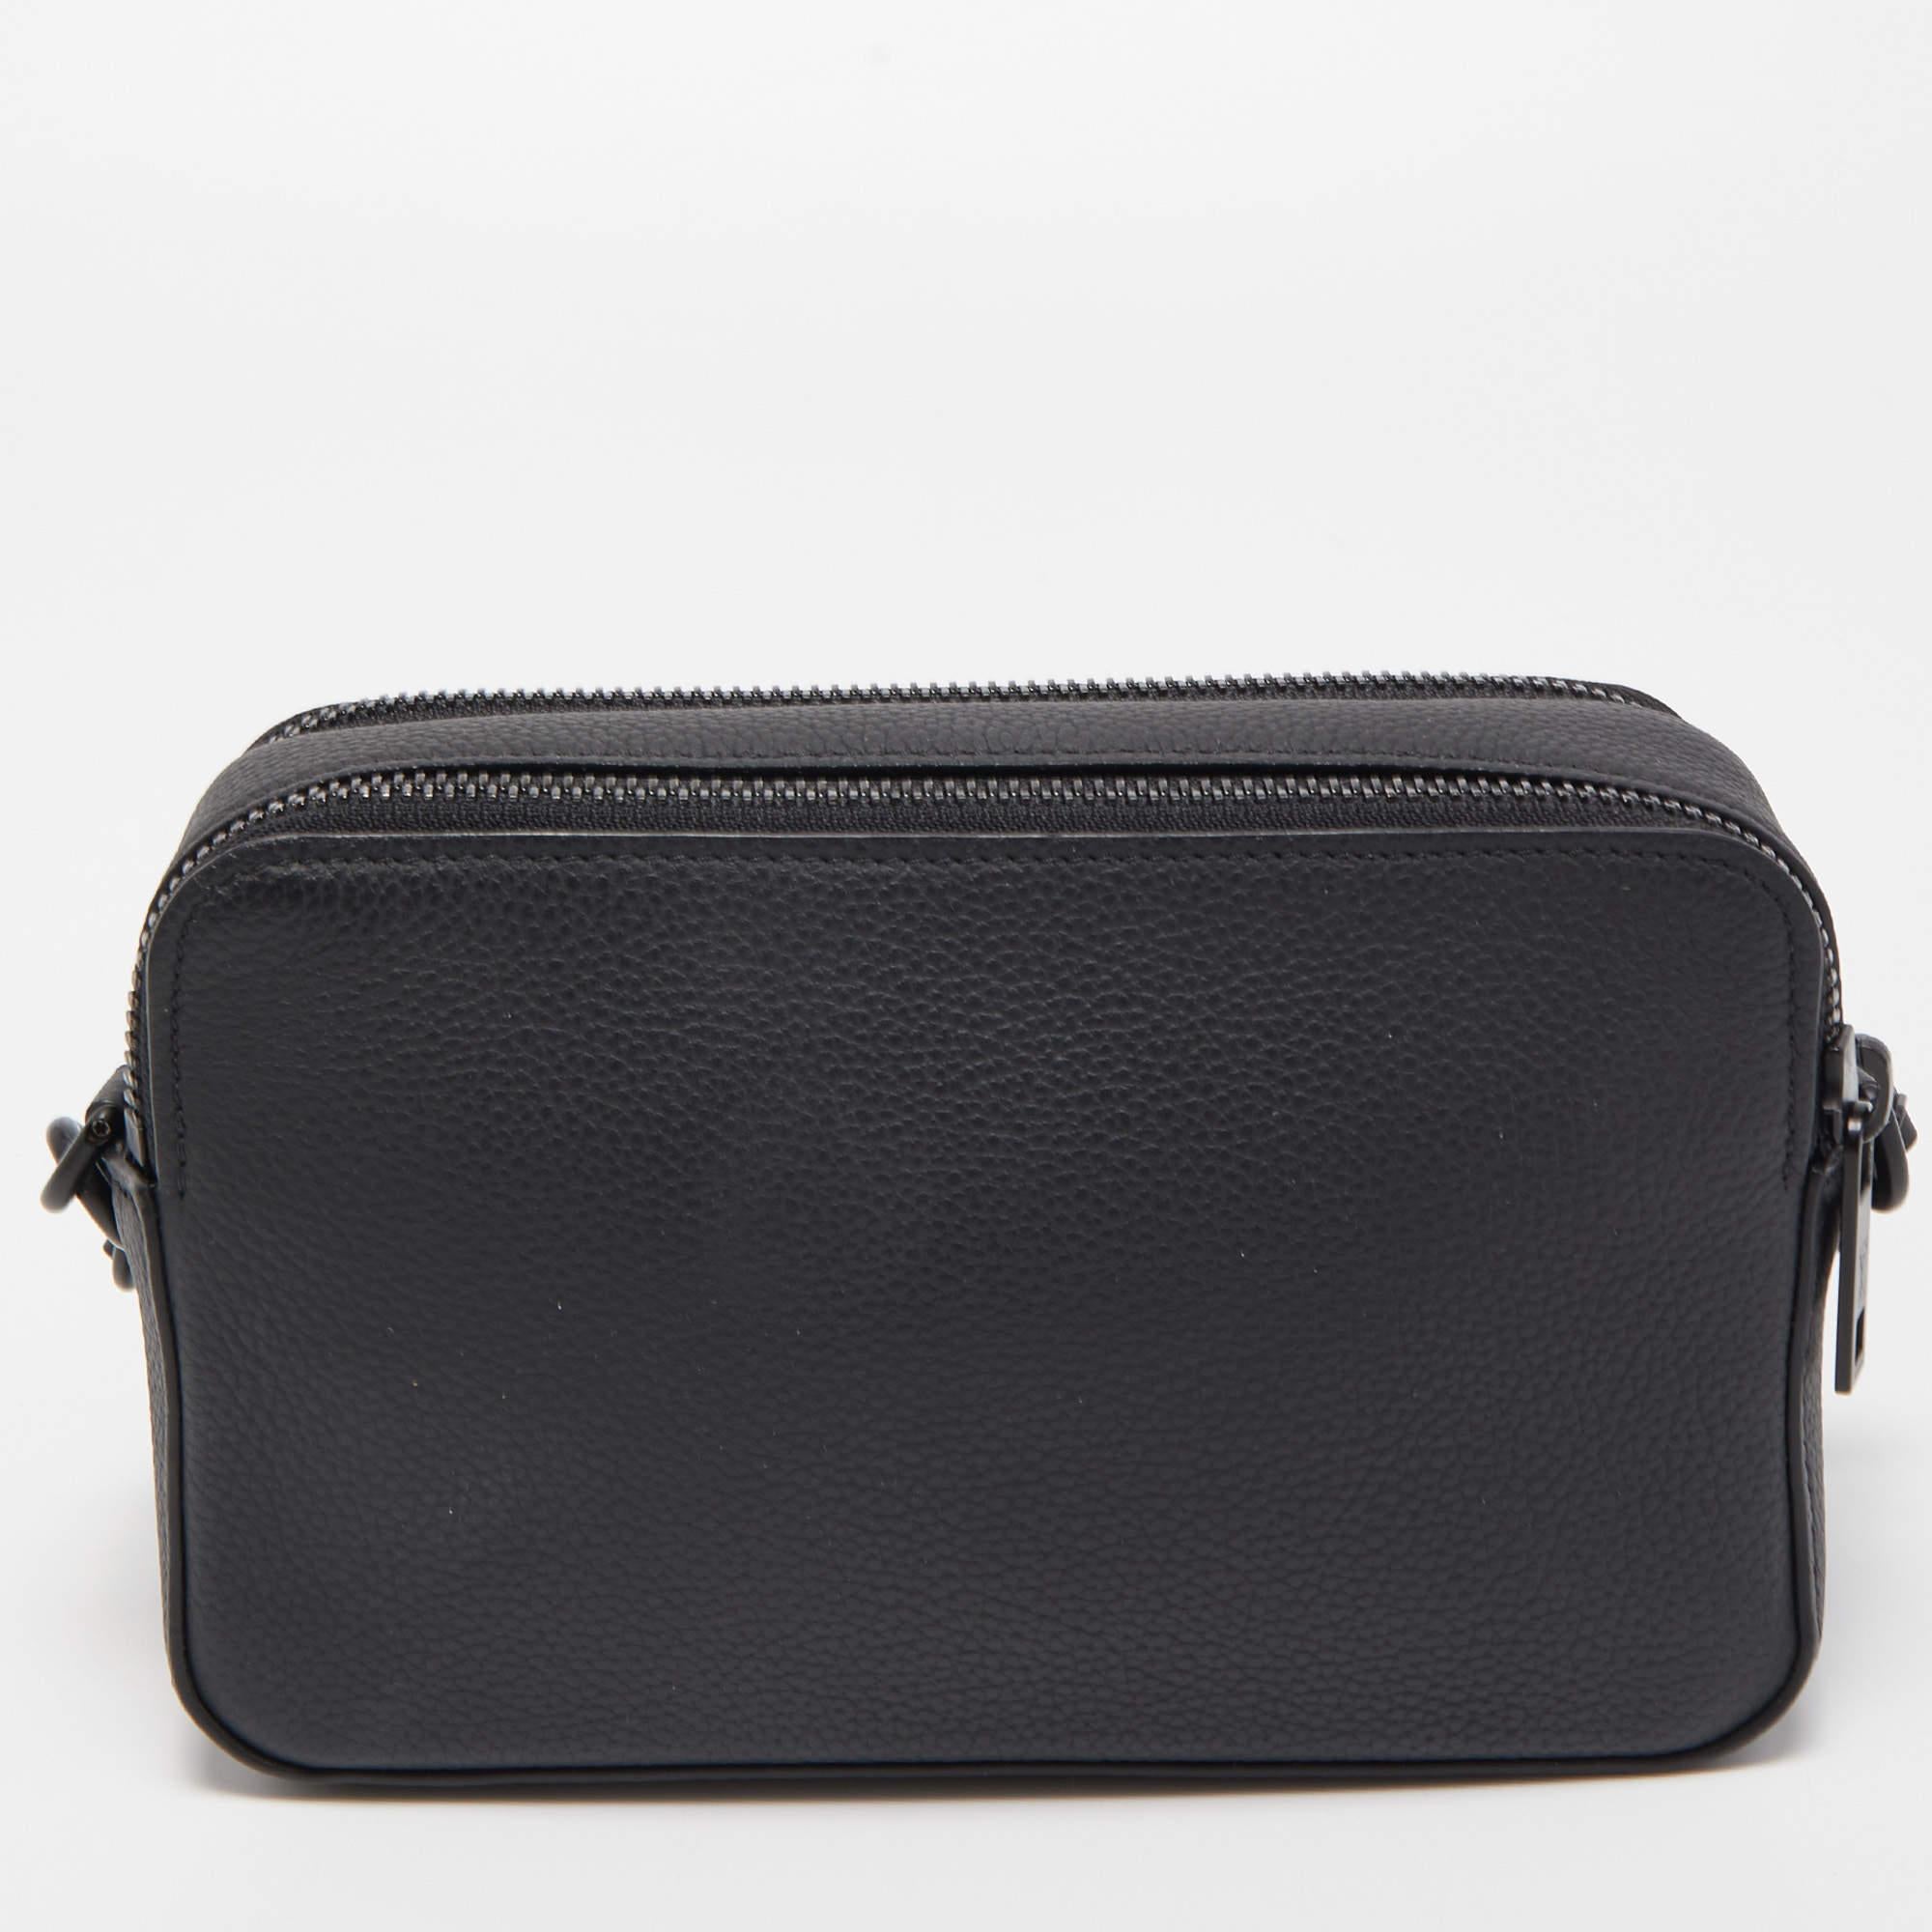 Compact and stylish, this wallet will be your favorite grab-and-go companion. Designed from quality materials, its interior is divided into different compartments to store your cards and cash perfectly.

Includes: Original Dustbag, Detachable Strap

